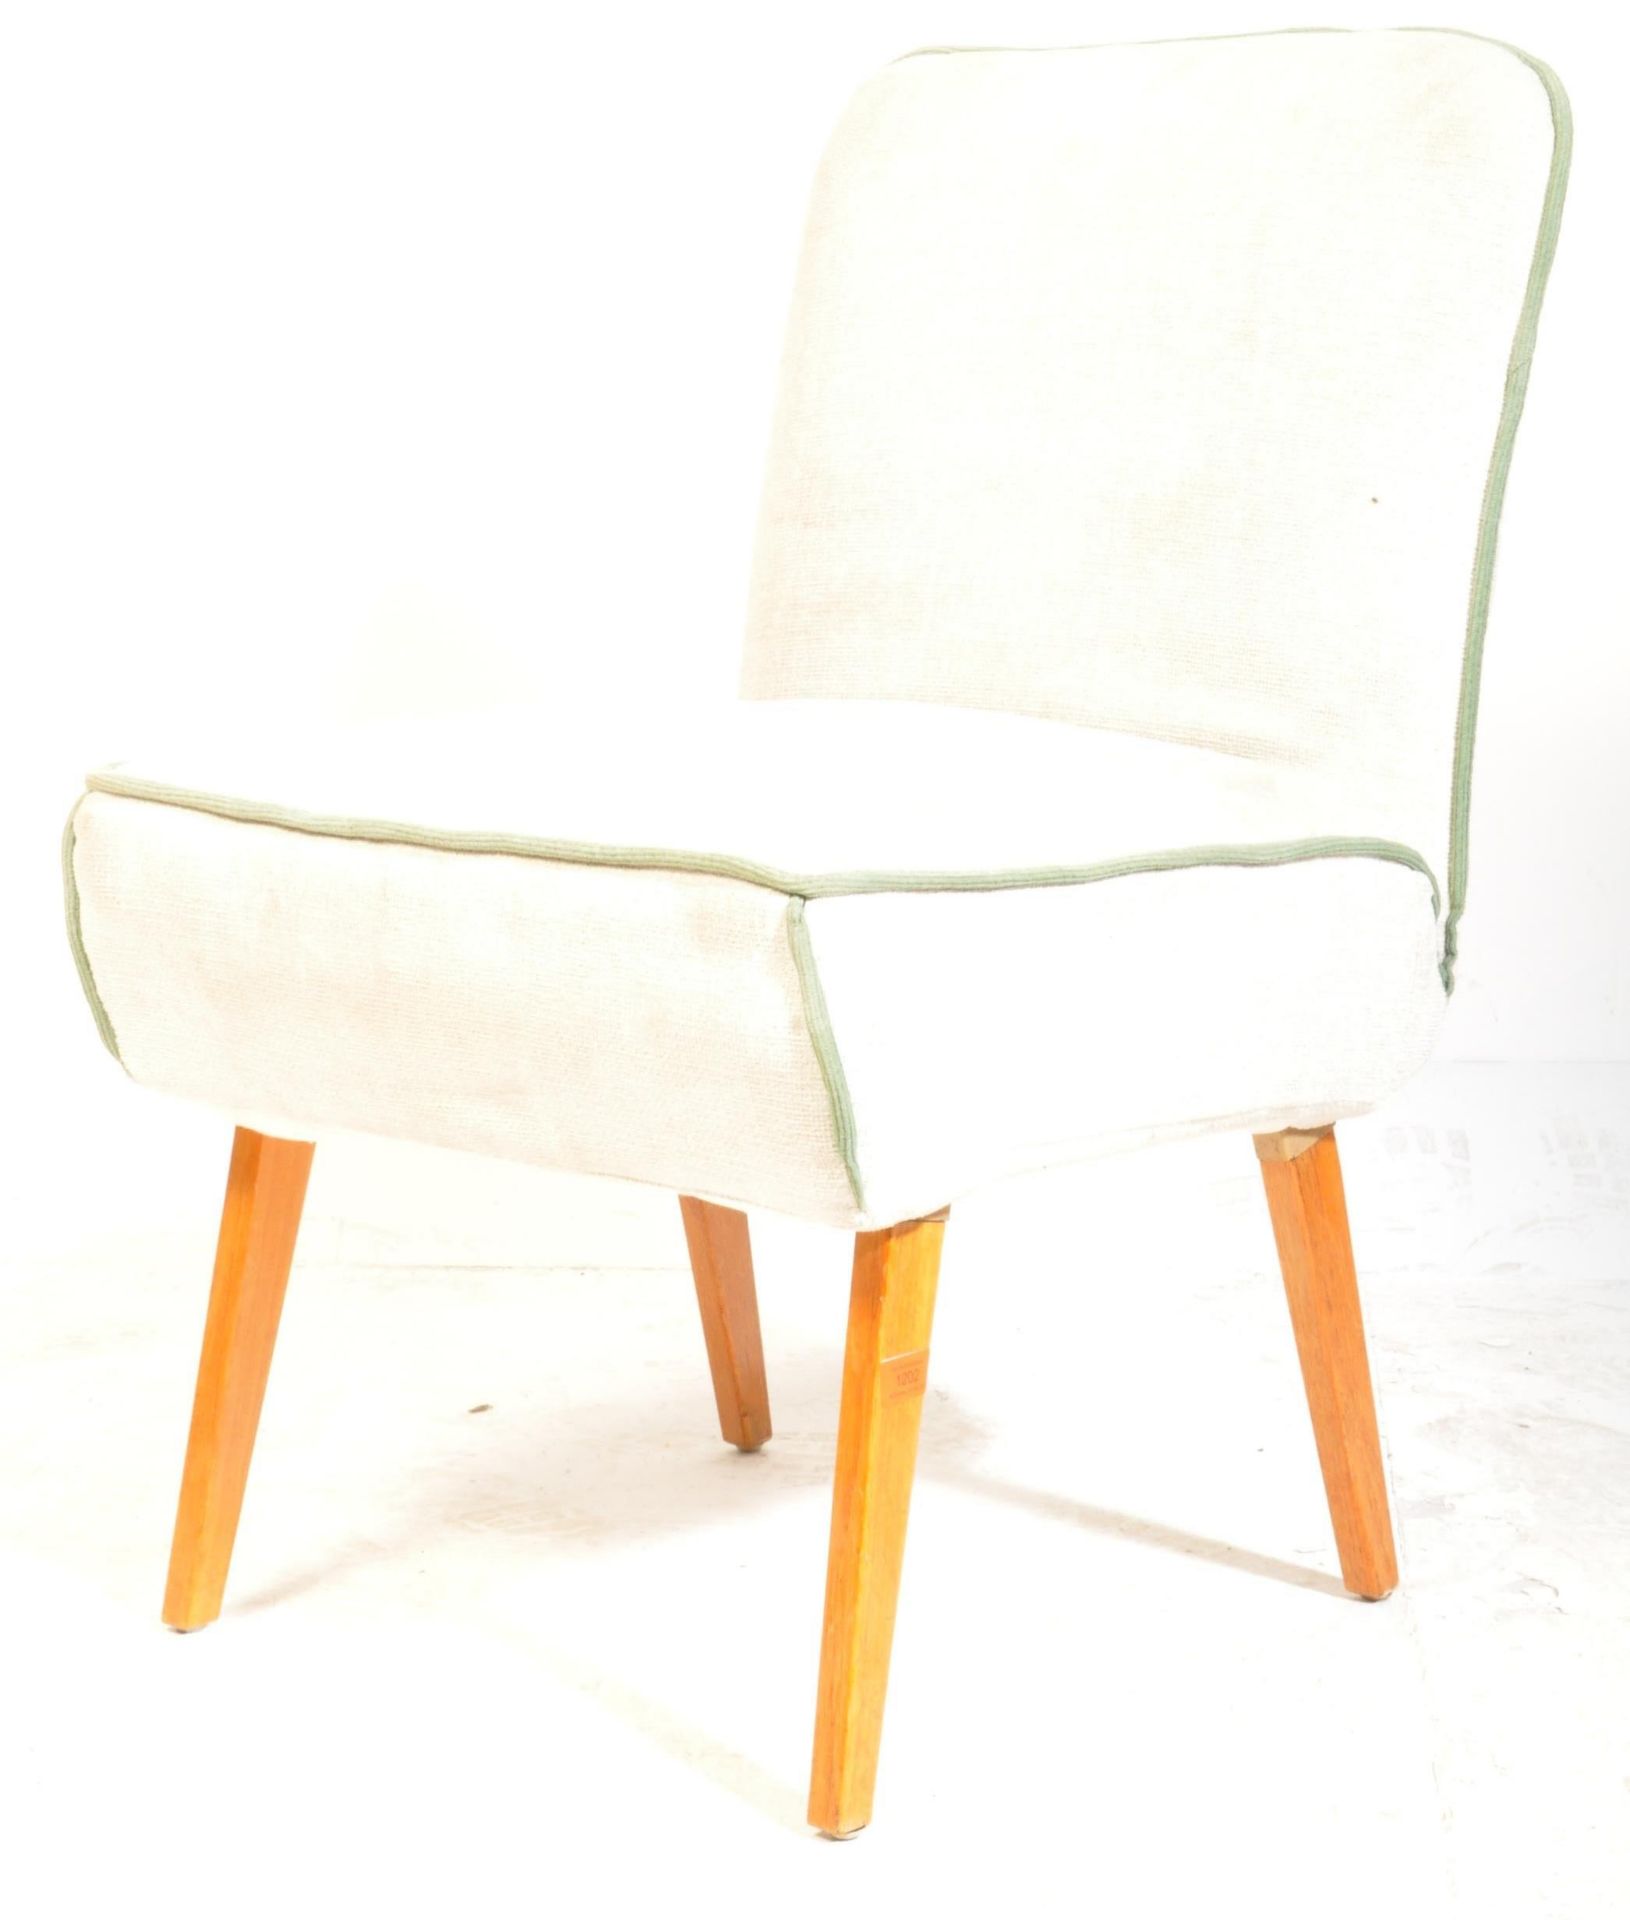 COCKTAIL CHAIR IN THE MANNER OF HOWARD KEITH